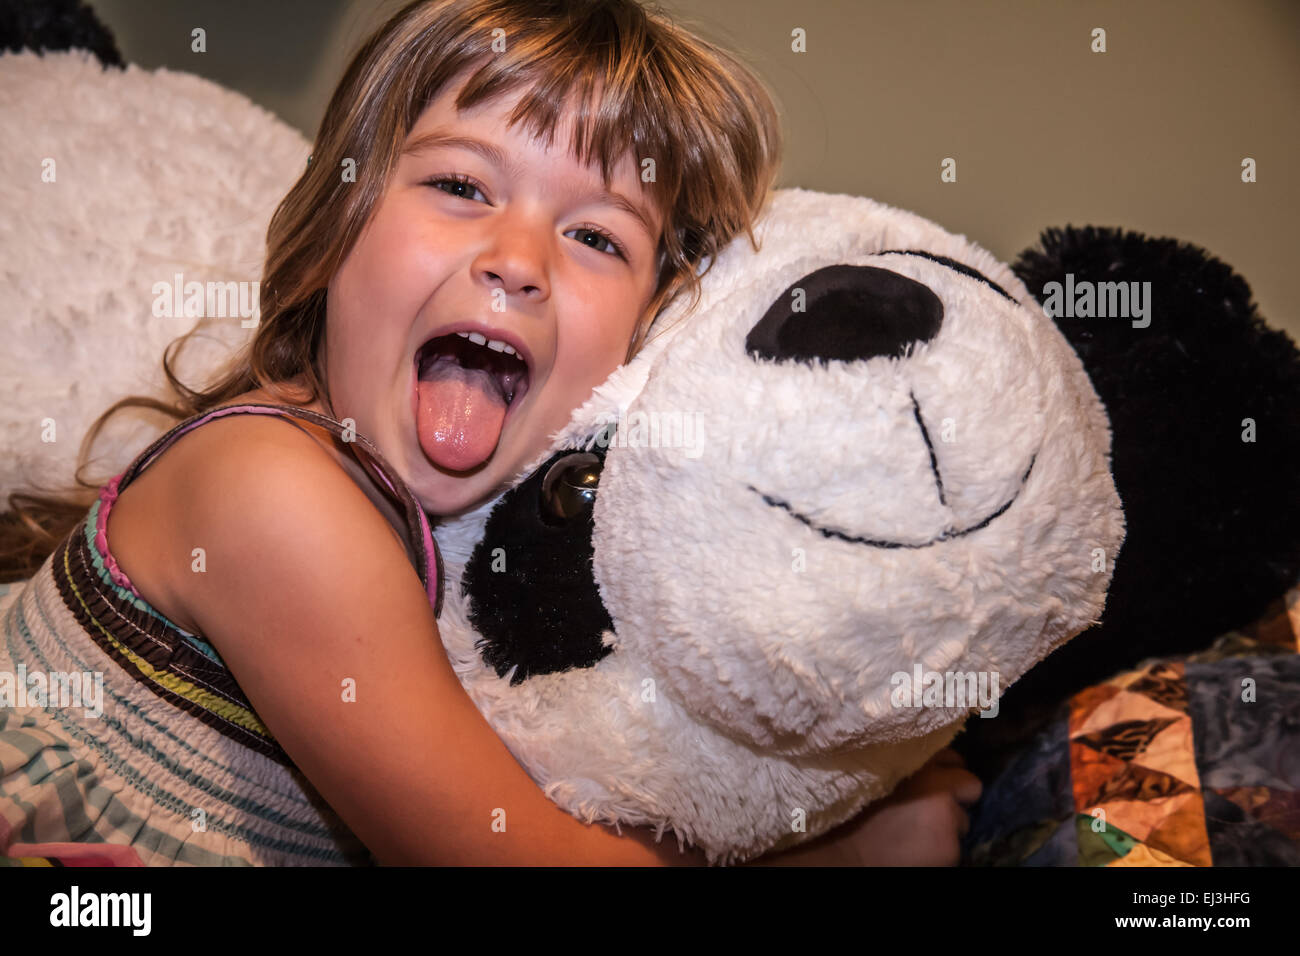 Four year old girl acting up by sticking her tongue out, hugging her large, stuffed panda bear Stock Photo